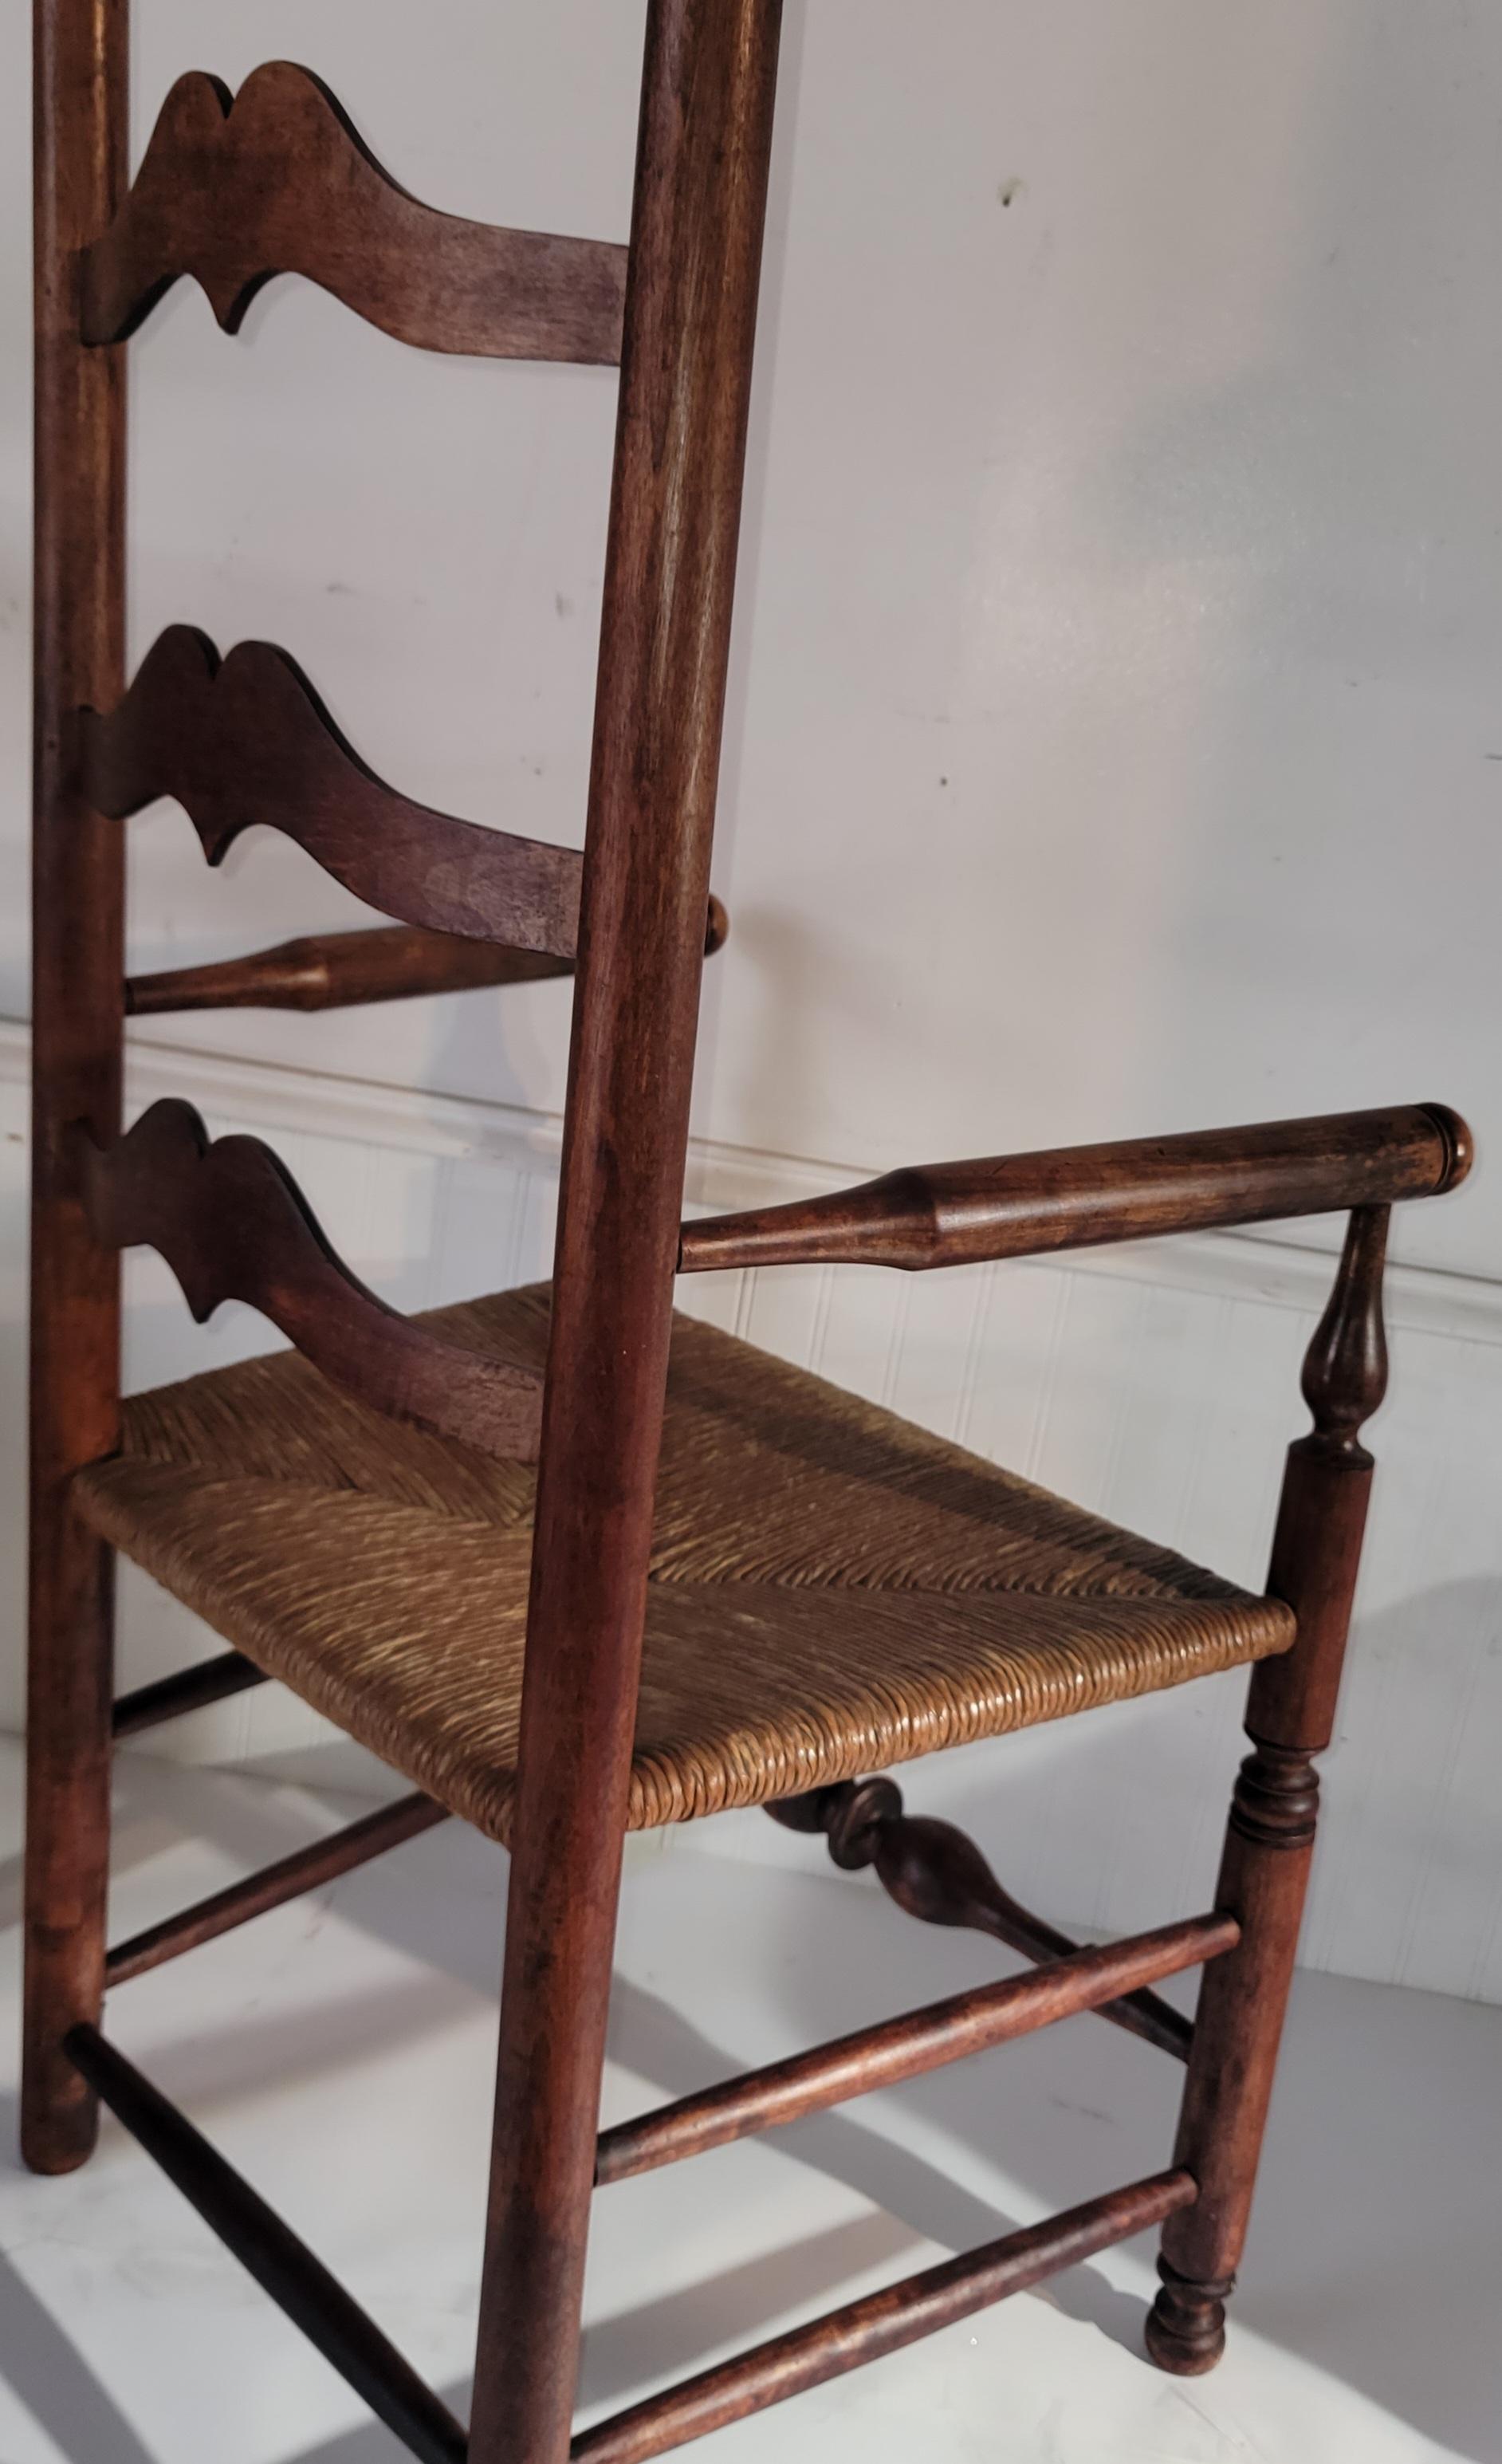 Mid-19th Century 19Thc Ladder back Chair With Hand Woven Seat For Sale